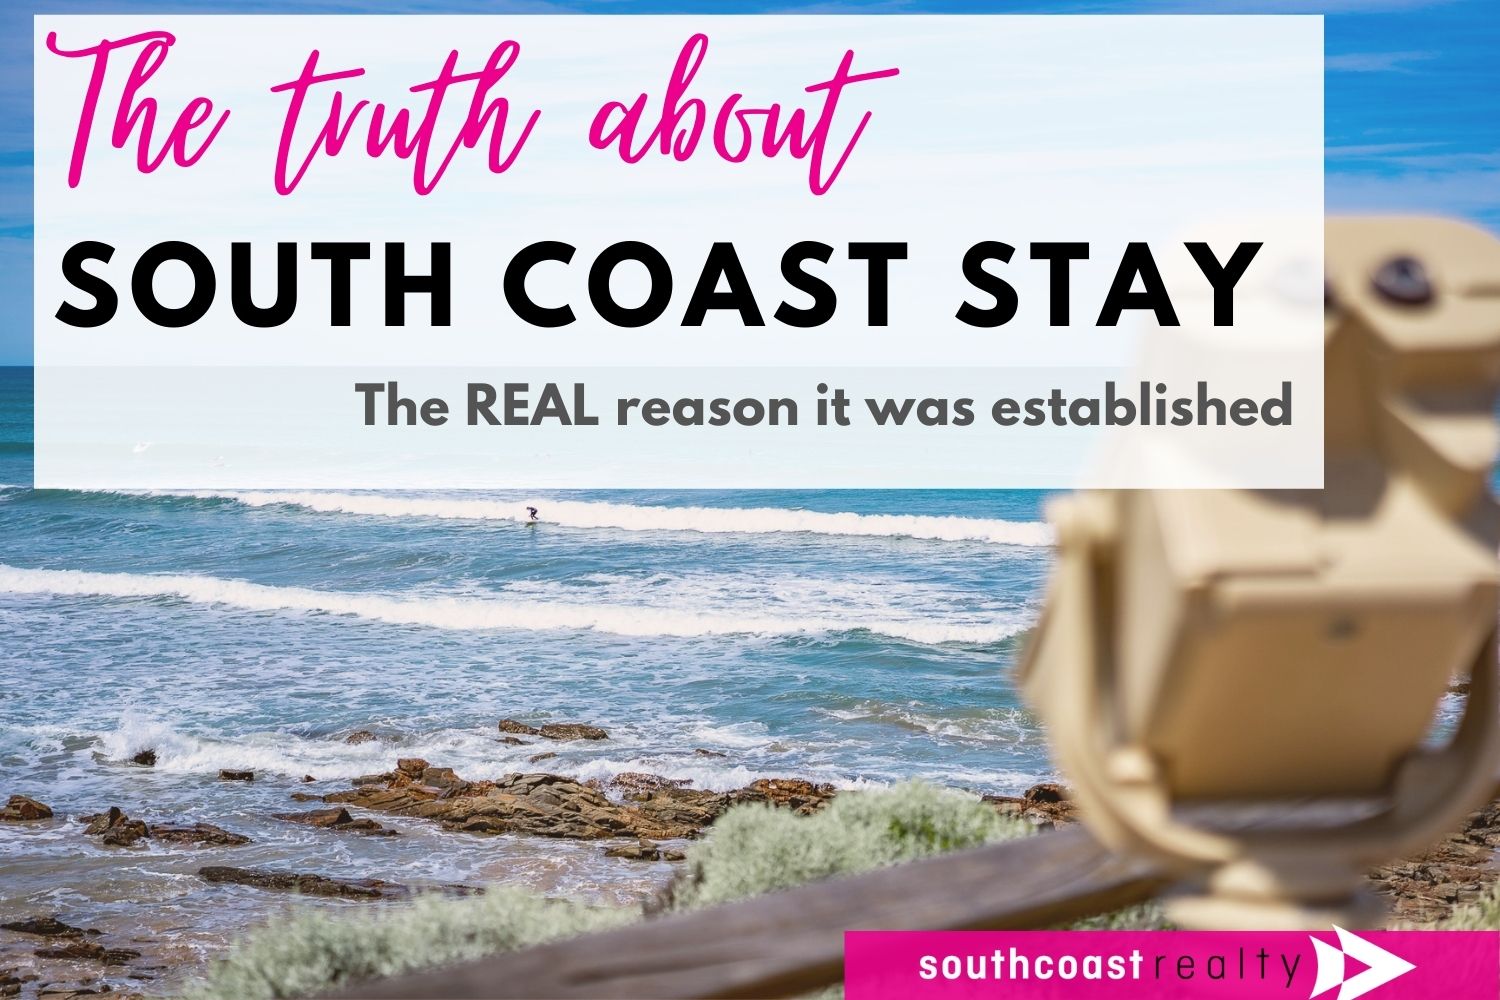 South Coast Stay – The REAL reason it was established